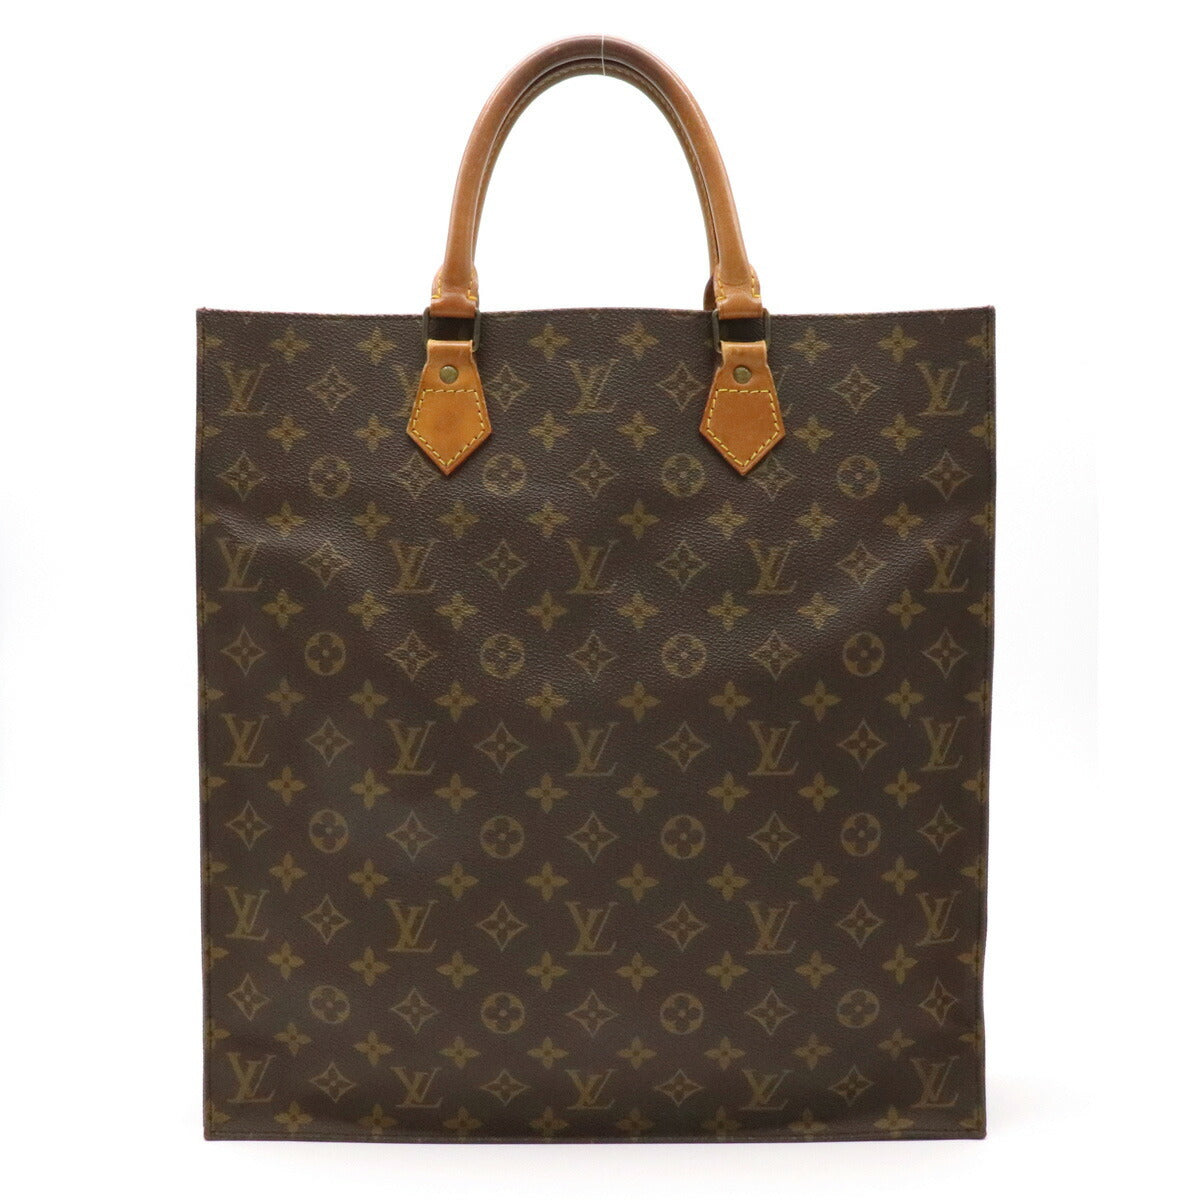 Louis Vuitton sac plat. Item not available on webstore, send us a